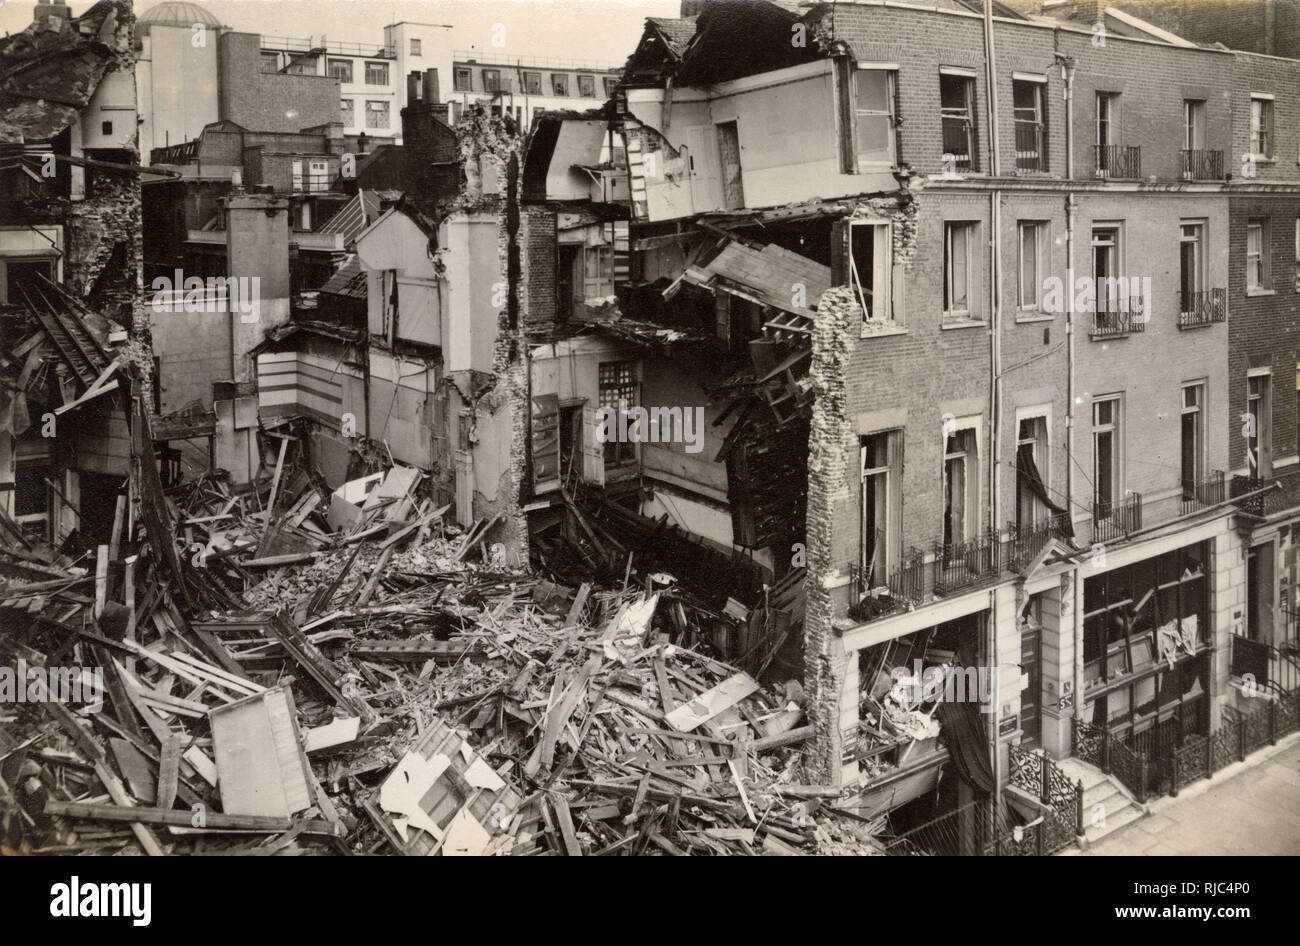 WW2 - Home Front - Bomb Damage in London - Savile Row backing on to Heddon Street - 16th September 1940. Stock Photo